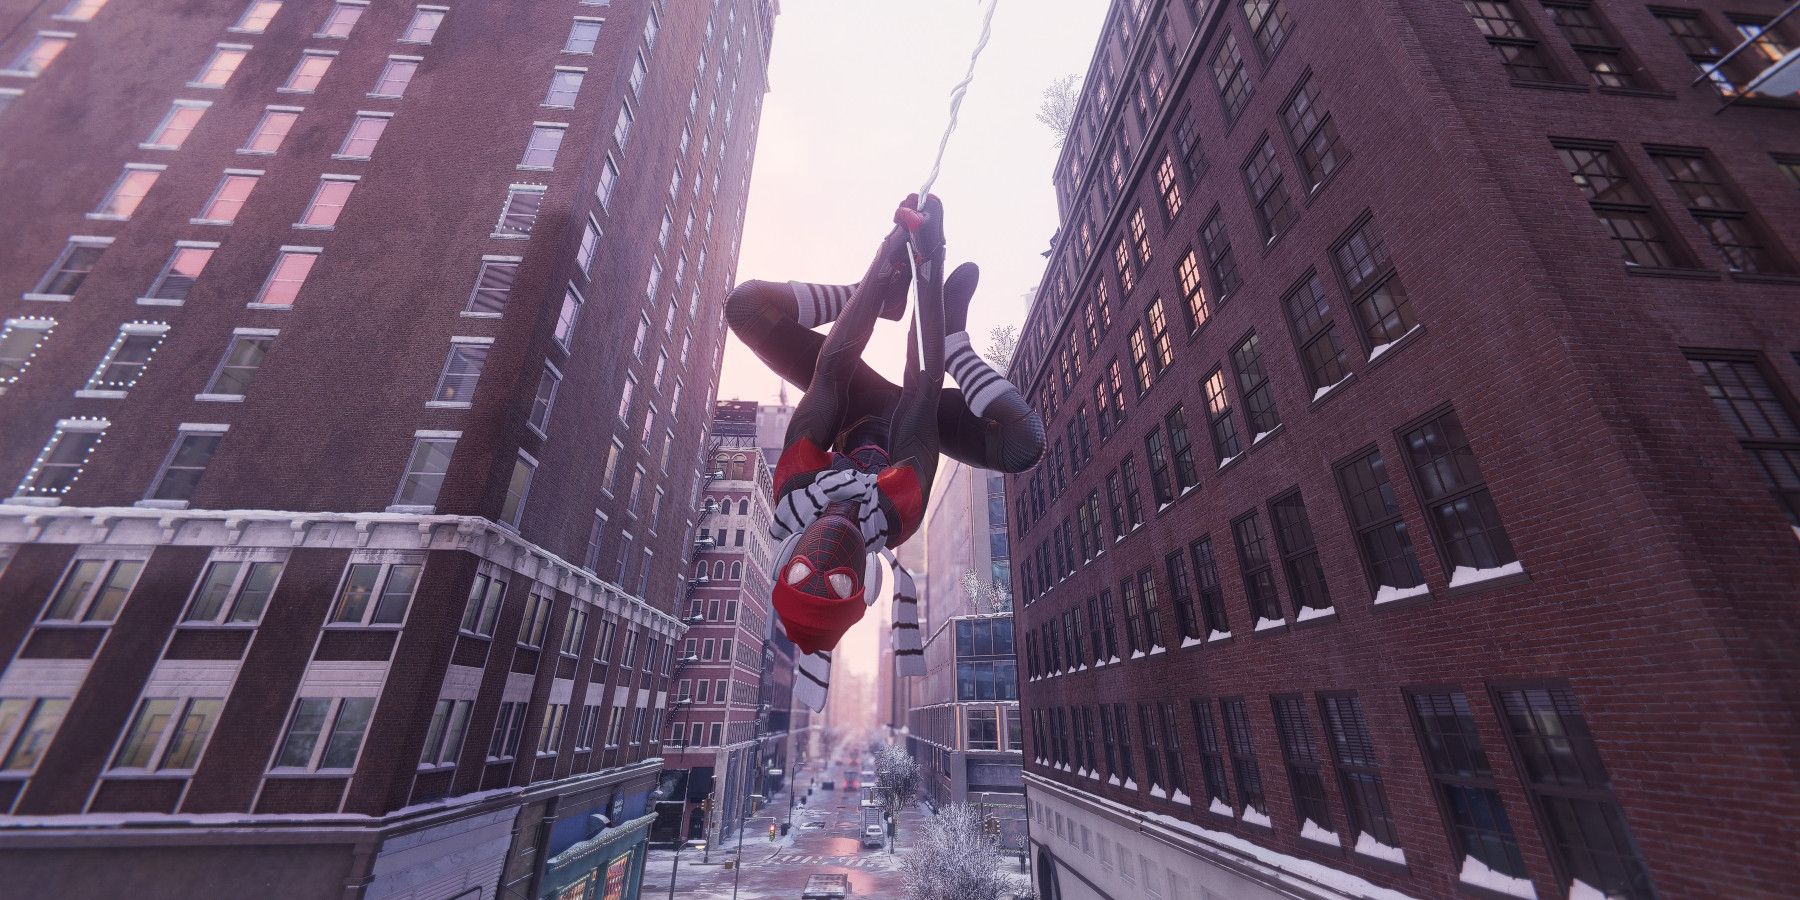 Miles Morales hanging upside-down from a web while wearing a knit scarf and legwarmers